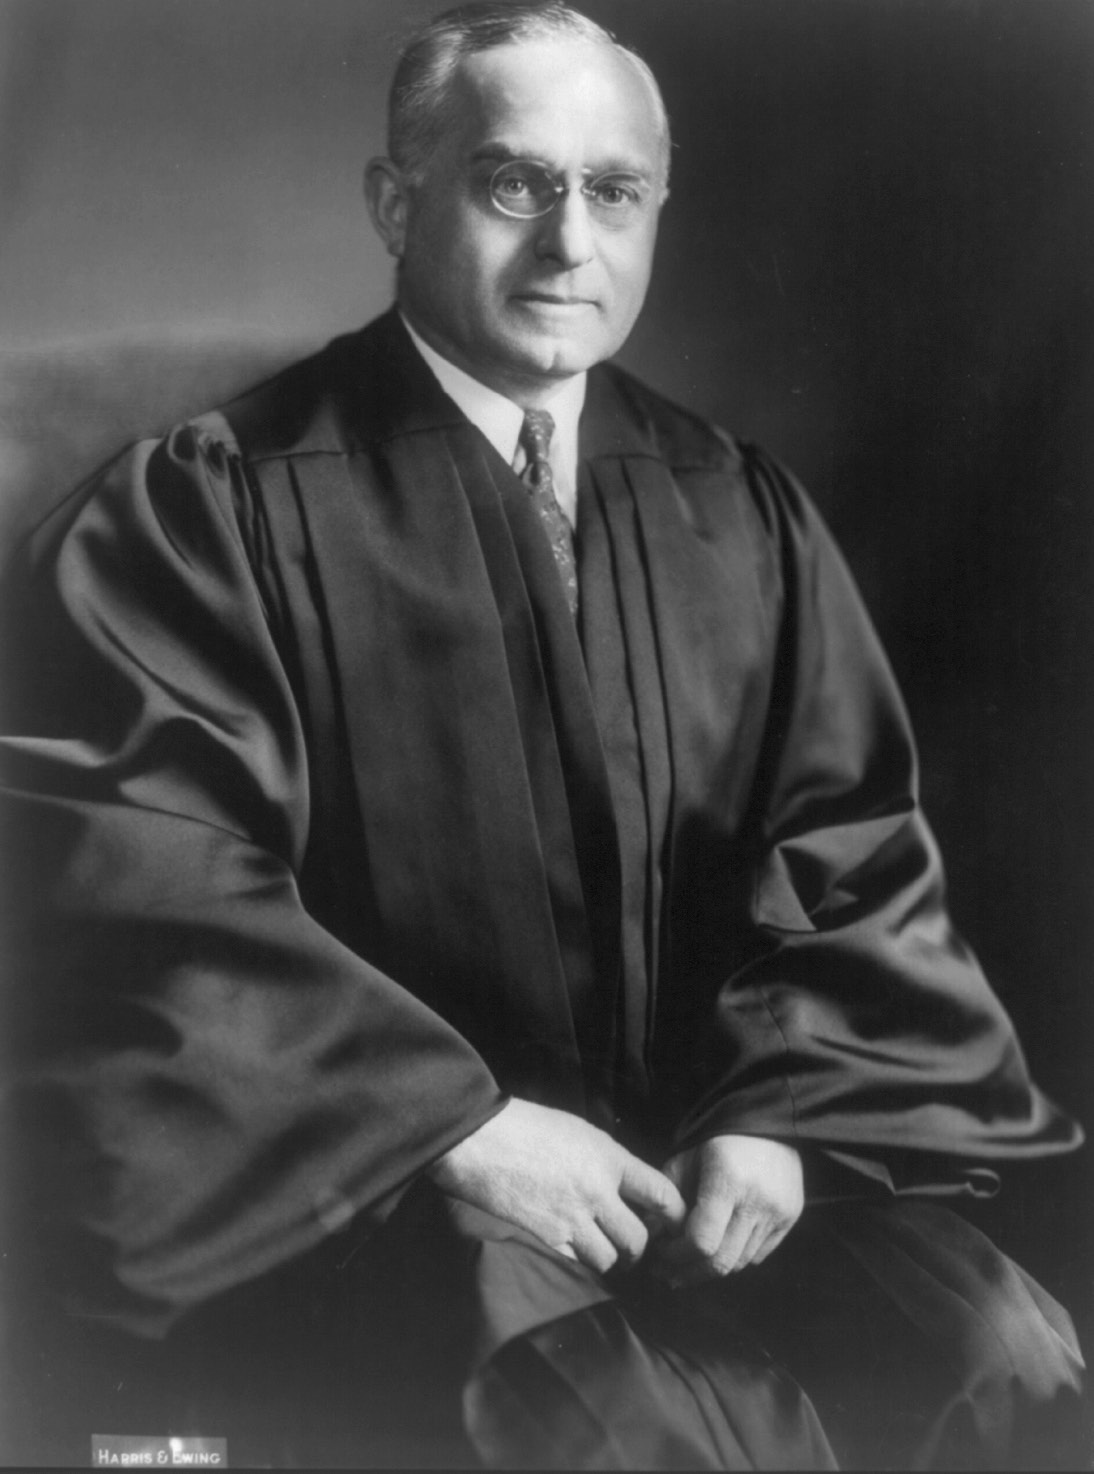 Felix Frankfurter, Supreme Court justice portrait., November 1958. Library of Congress, Prints and Photographs Division, NYWT&S Collection, LC-USZ62-134429